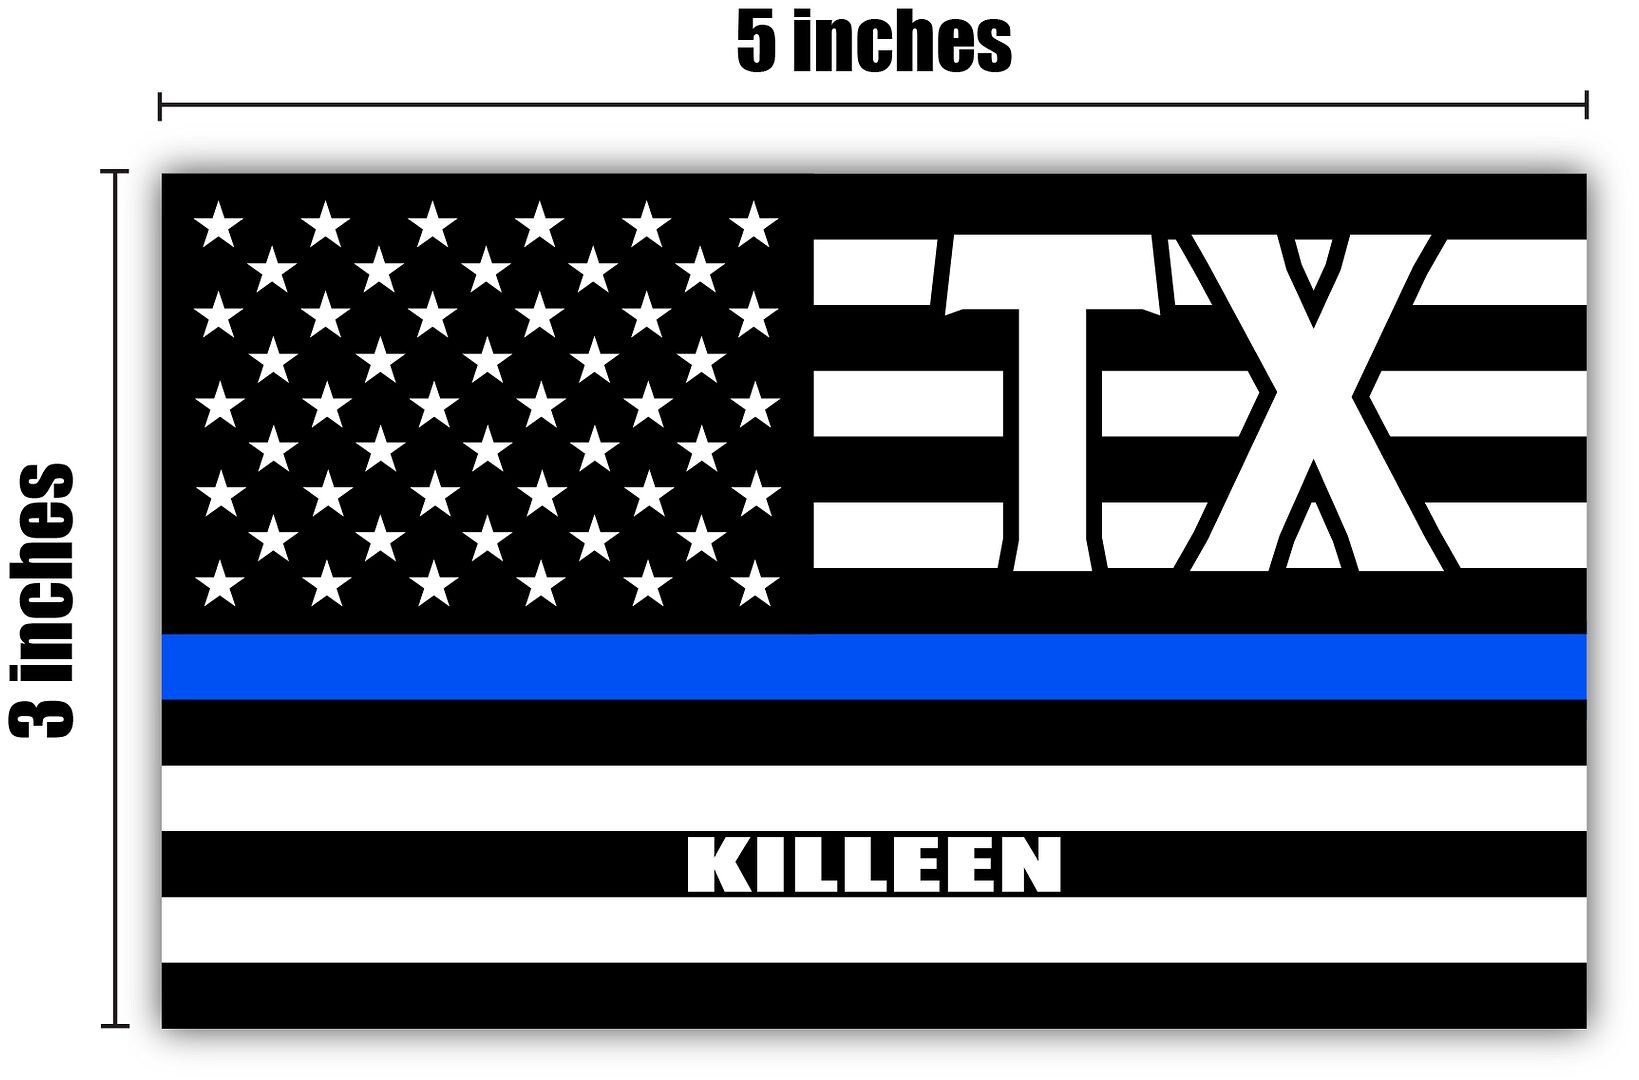 Killeen TX Texas Bell County Thin Blue Line Stealthy USA Flag pic photo